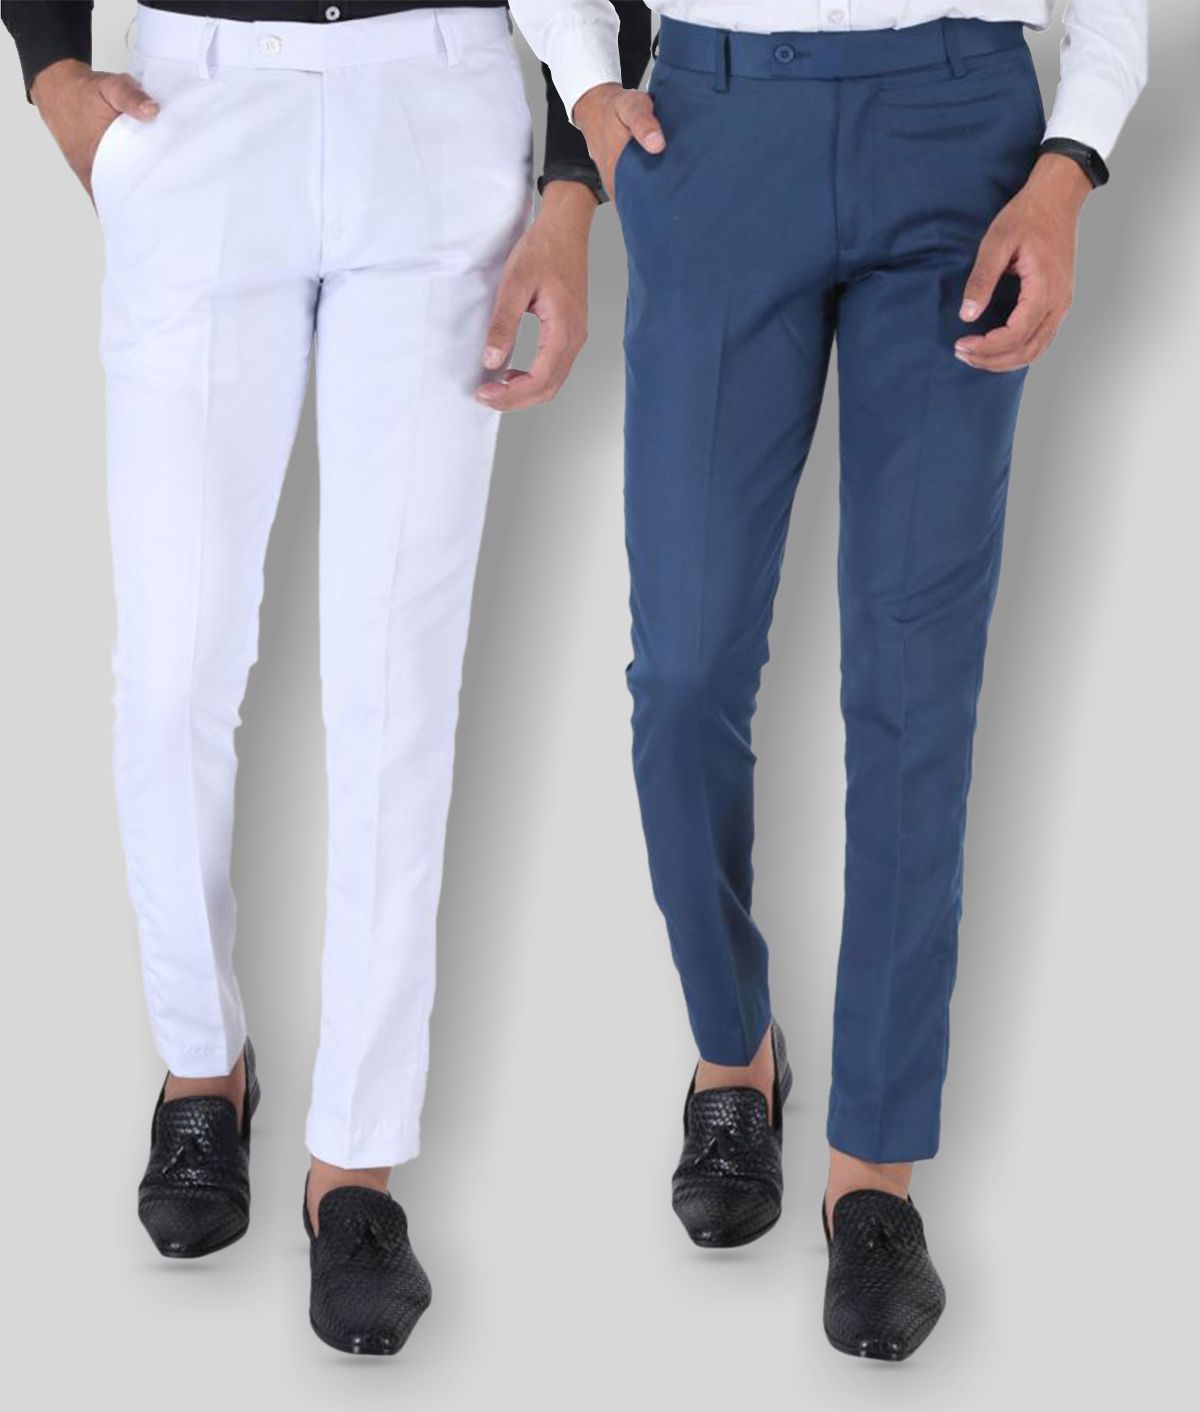     			SREY - White Polycotton Slim - Fit Men's Trousers ( Pack of 2 )